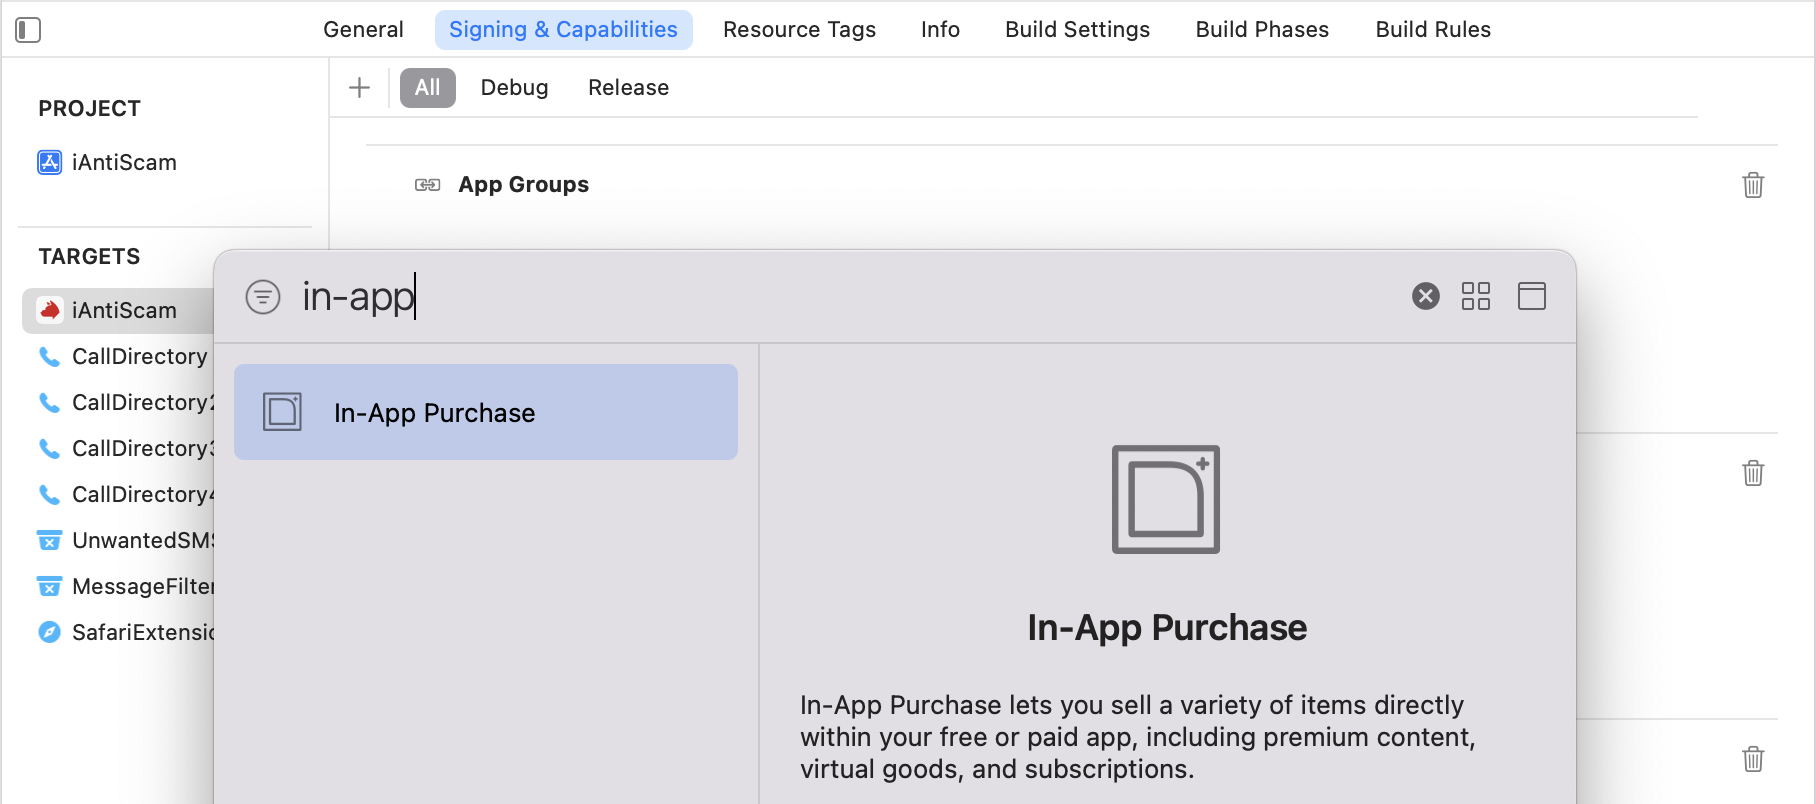 Add the in-app purchase capability